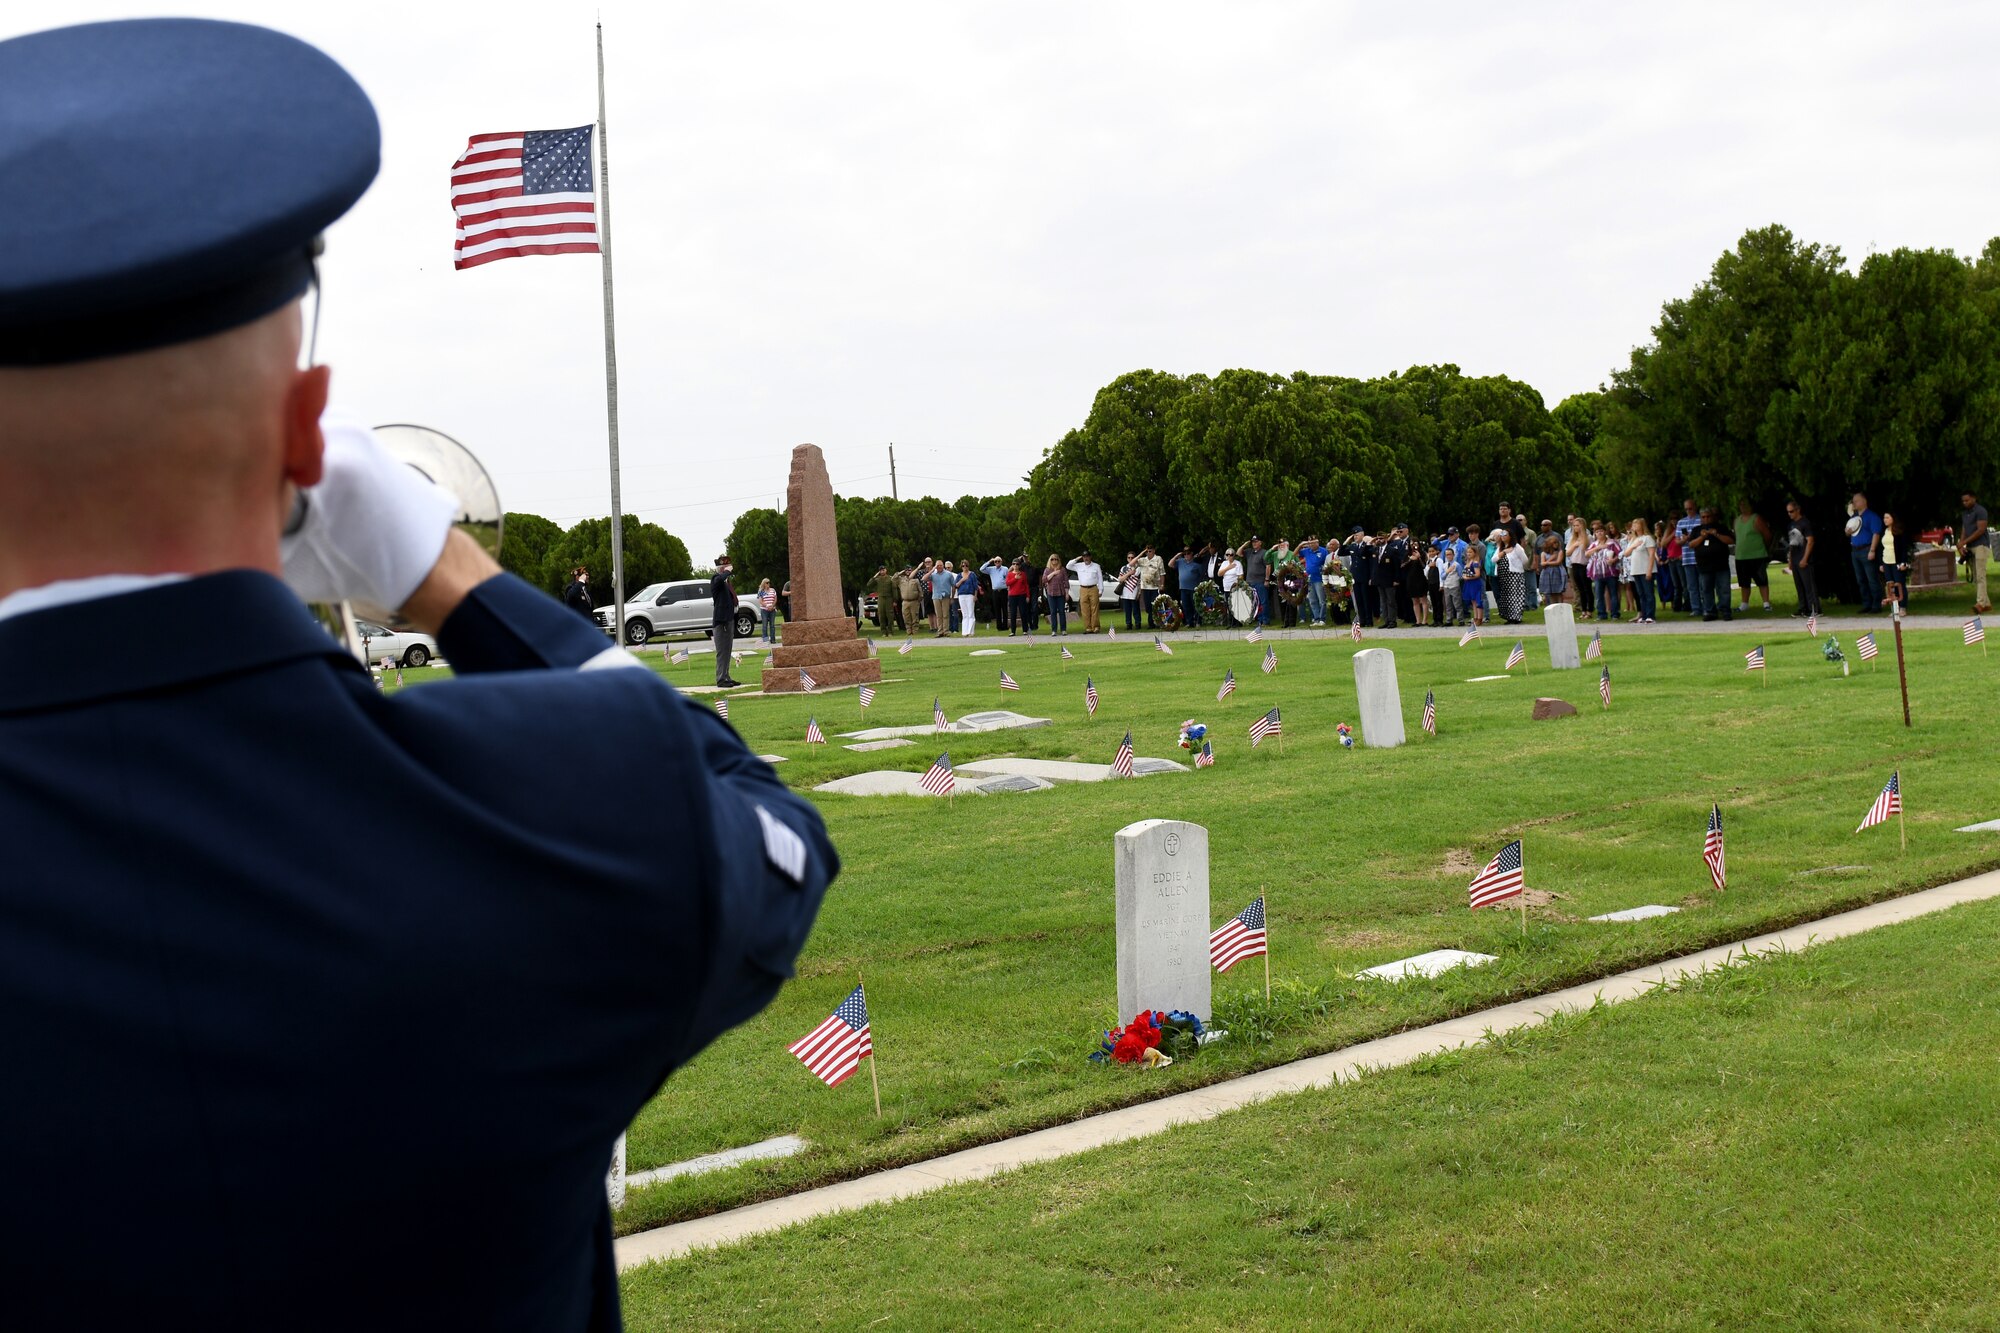 Tech. Sgt. Jedidiah Coover, NCO in charge of Honor Guard assigned to the 97th Force Support Squadron, plays Taps during a Memorial Day Ceremony, May 27, 2019, at Altus, Okla. Taps is a song that signifies respect for fallen service members who gave the ultimate sacrifice for their country.